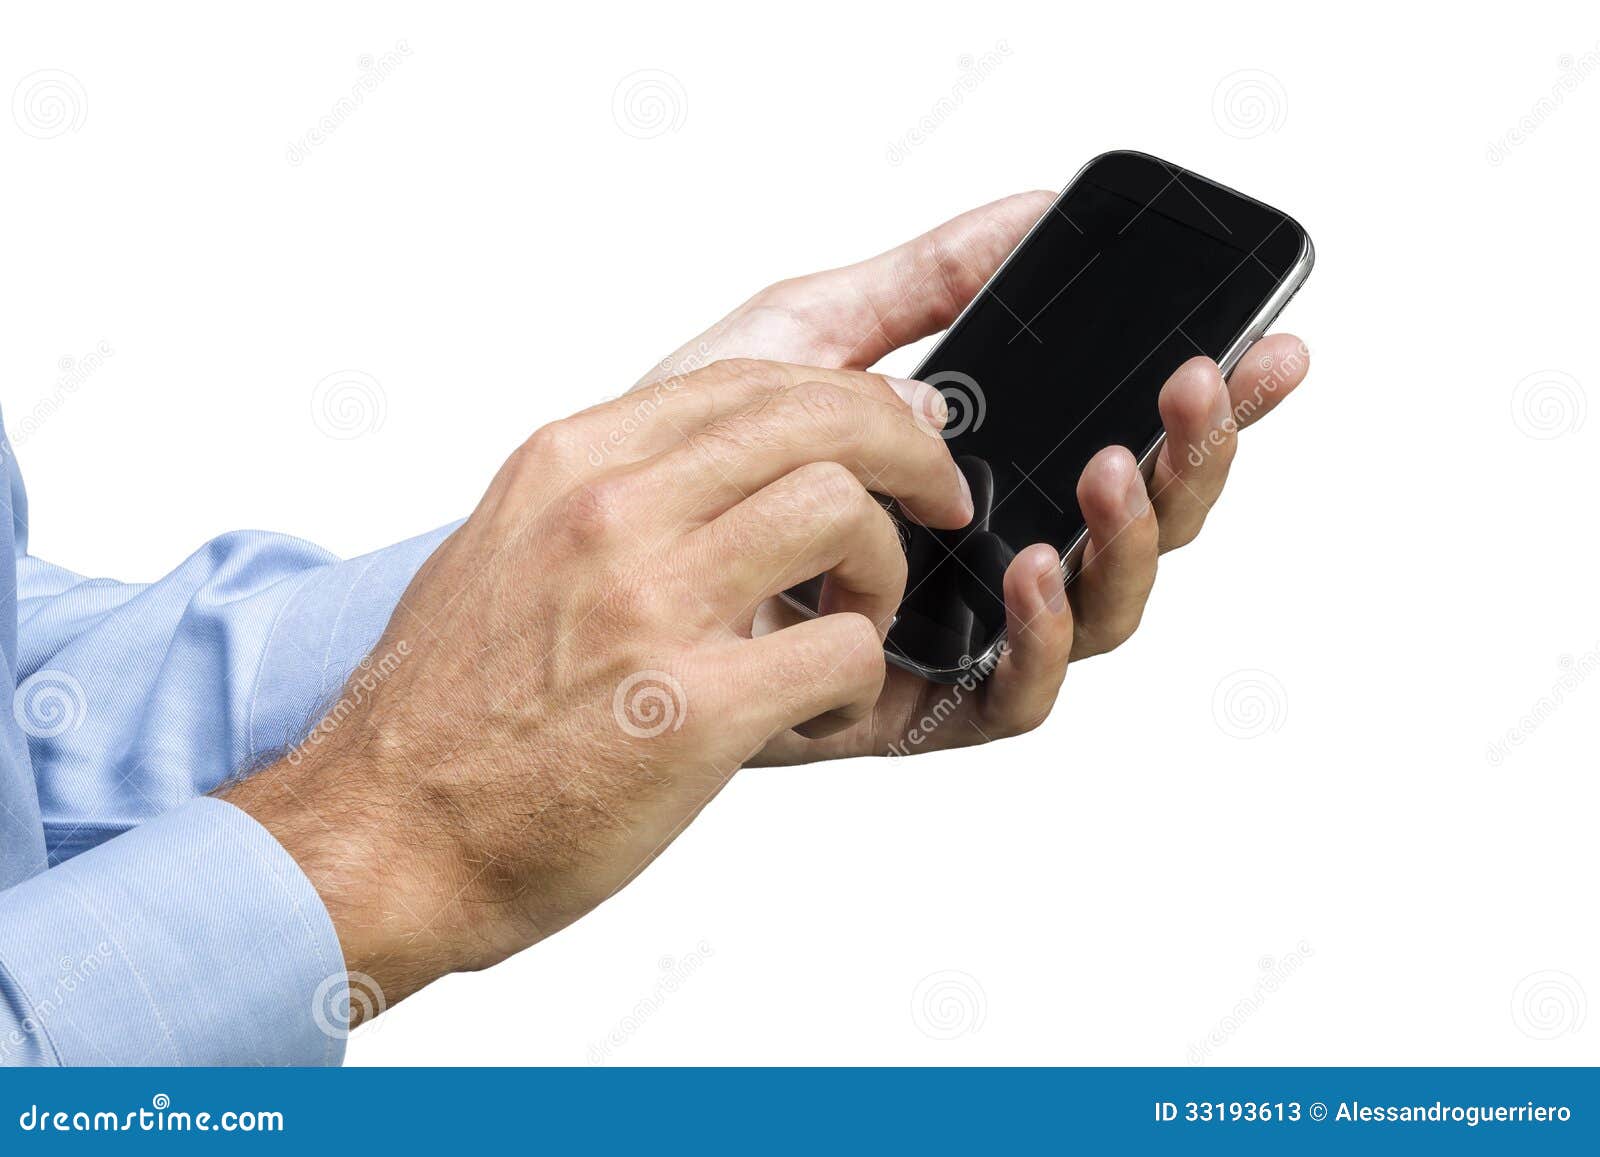 Hand on the smart phone stock image. Image of business - 33193613